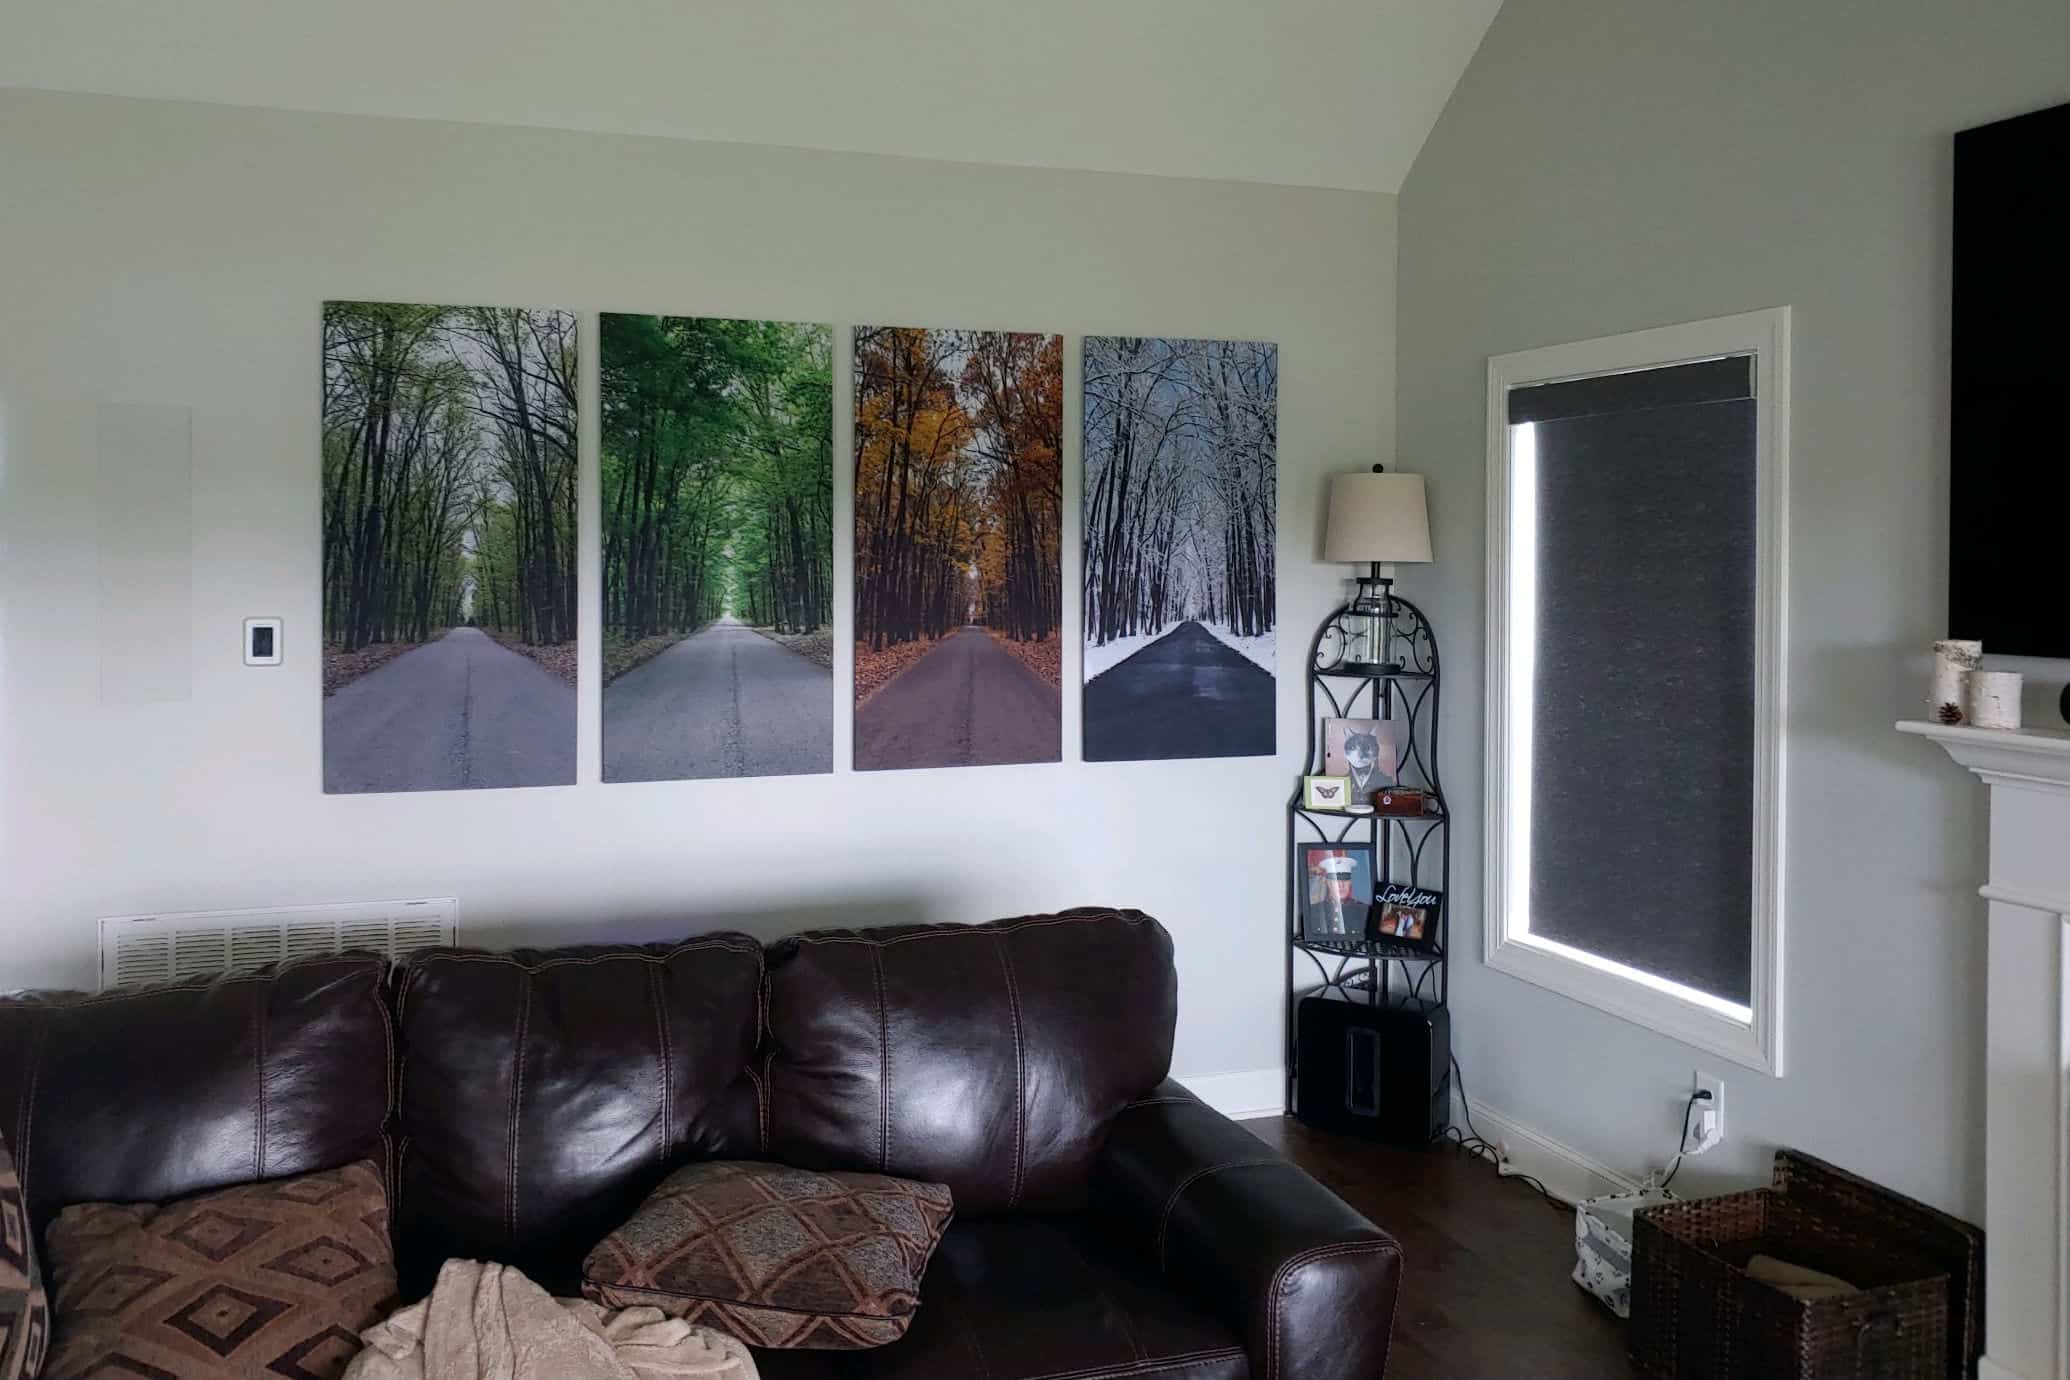 Living Room with WAVEPro acoustic treatment panels and four seasons custom print images